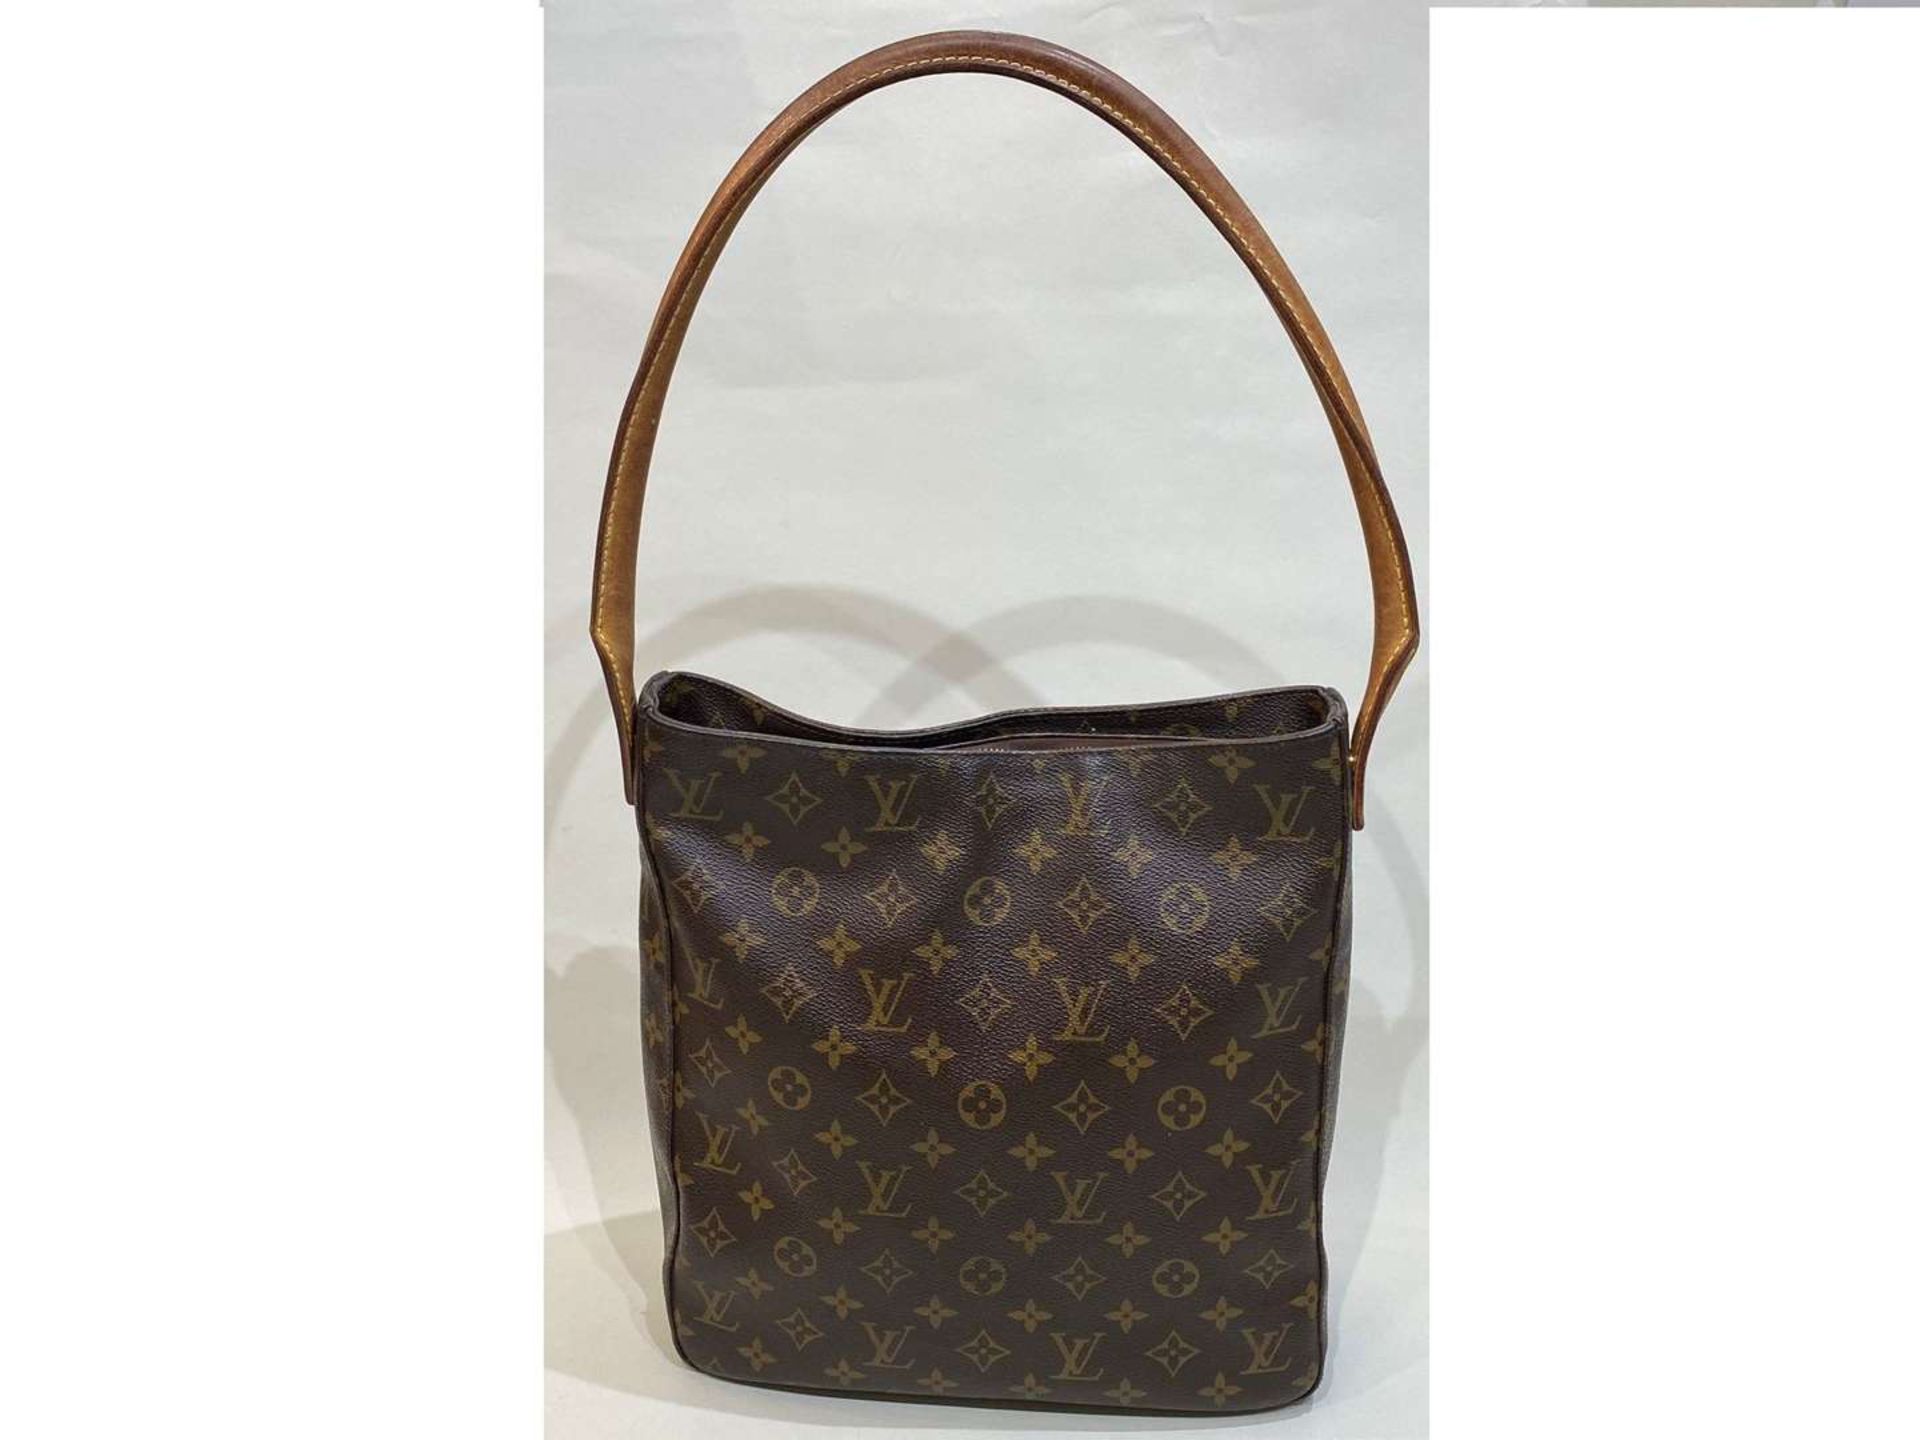 LOUIS VUITTON, Looping, tan stitched leather and monogrammed shoulder bag - Bild 2 aus 7